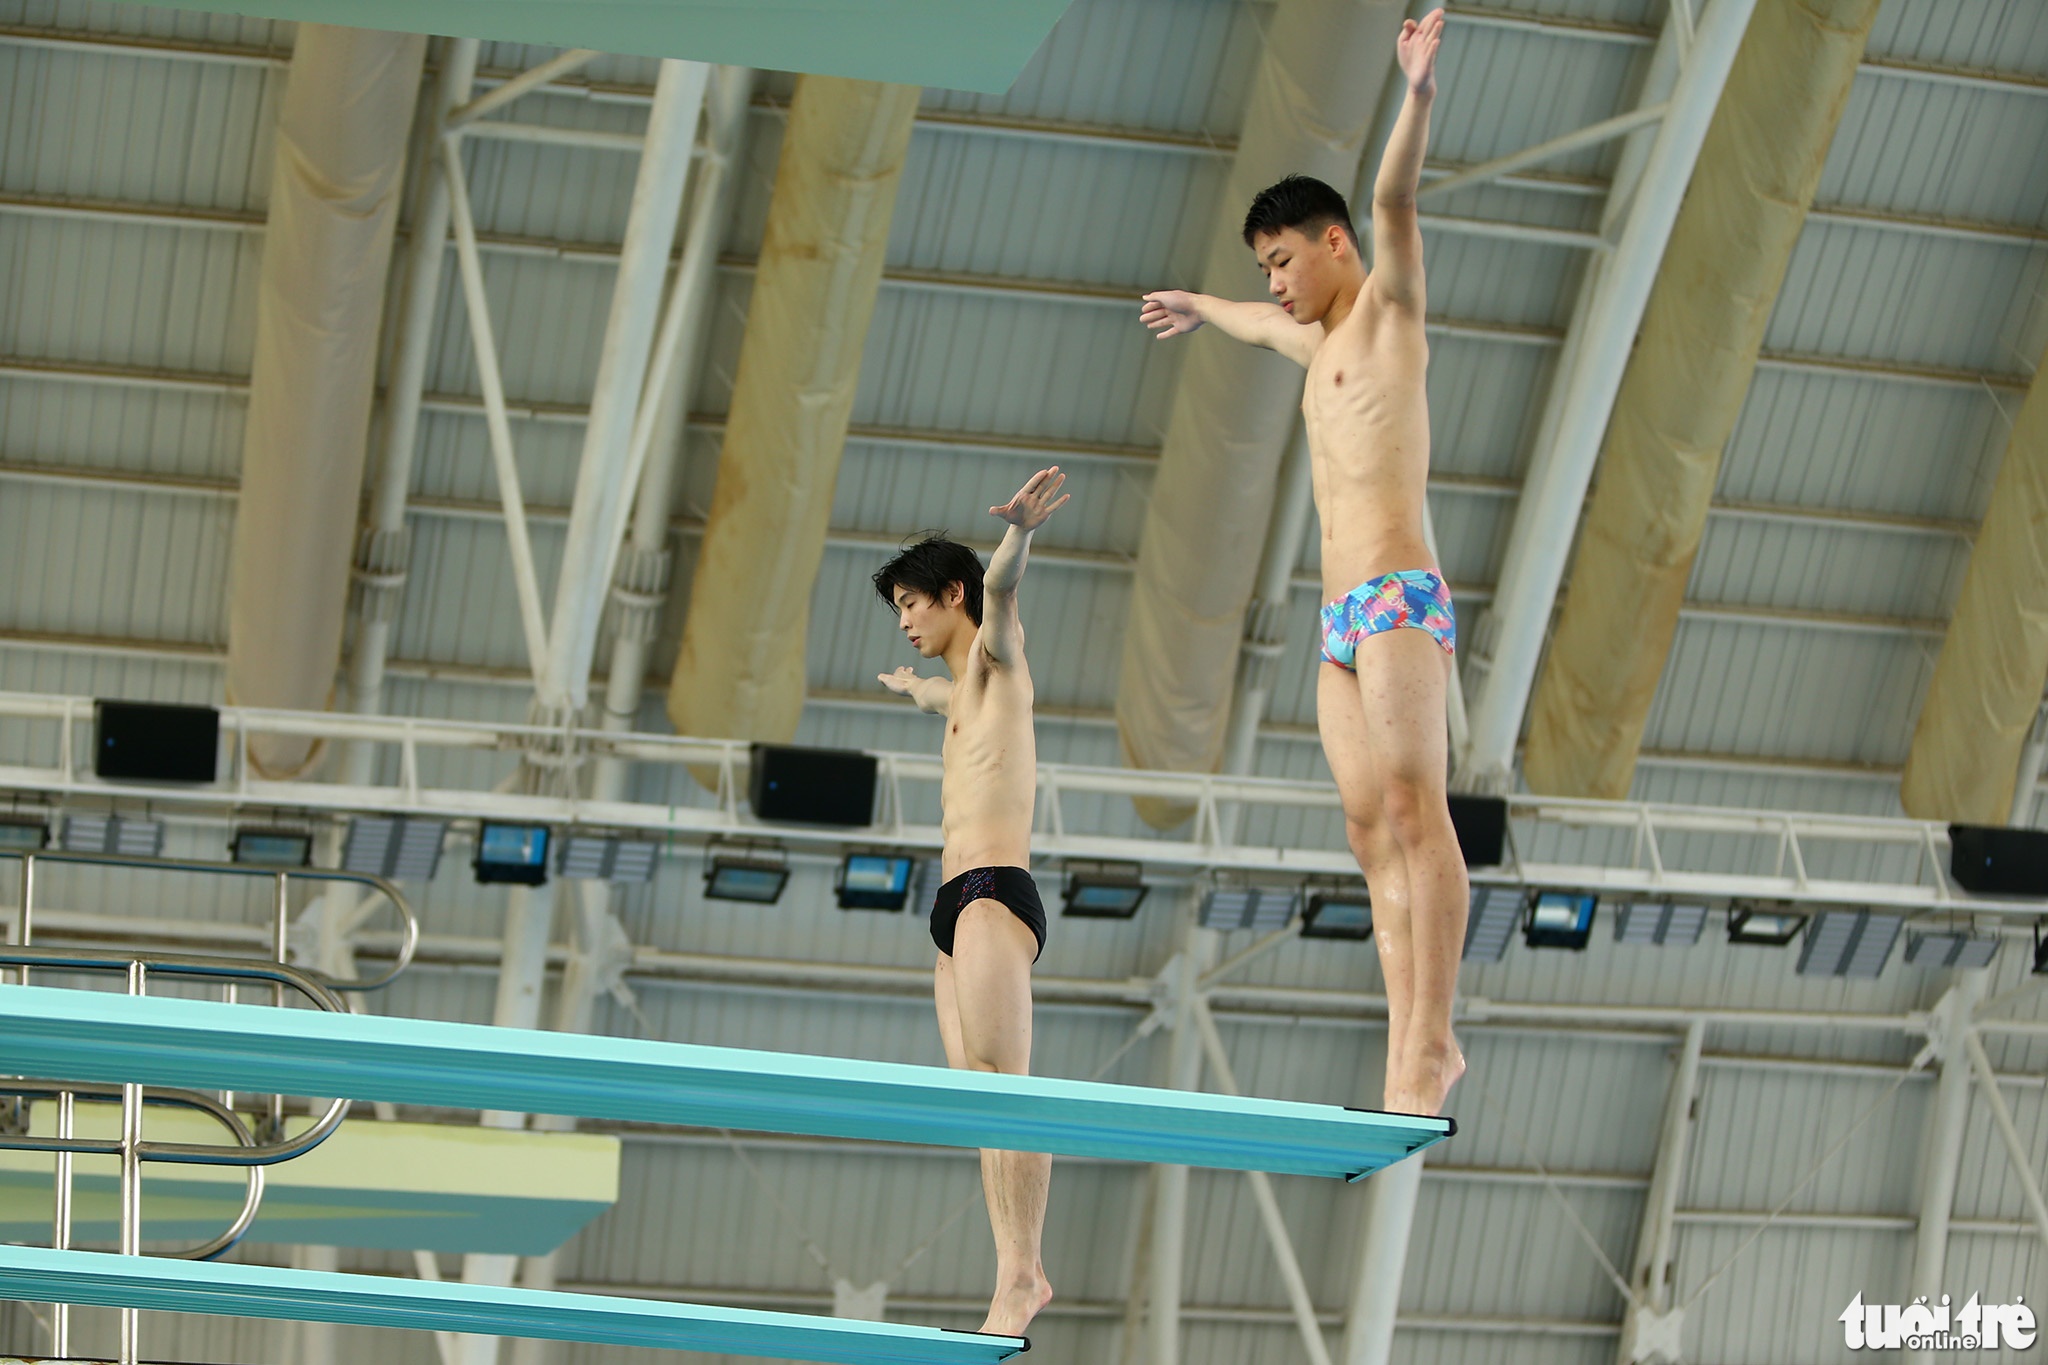 Vietnam’s diving team has less than one month to prepare for SE Asian Games